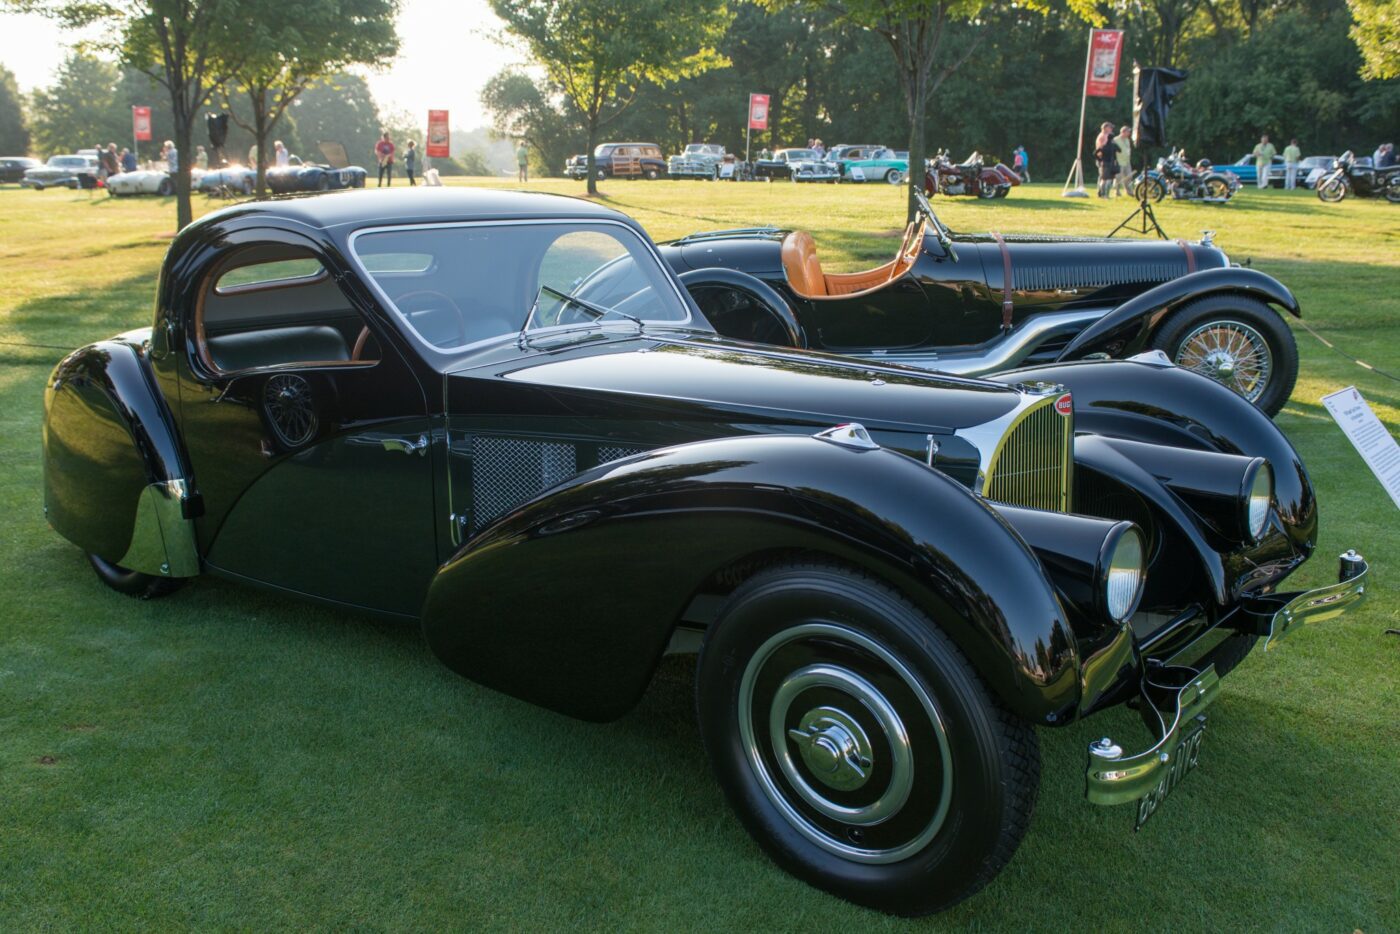 2016 Concours d'Elegance of America | Car Events | SuperCars.net